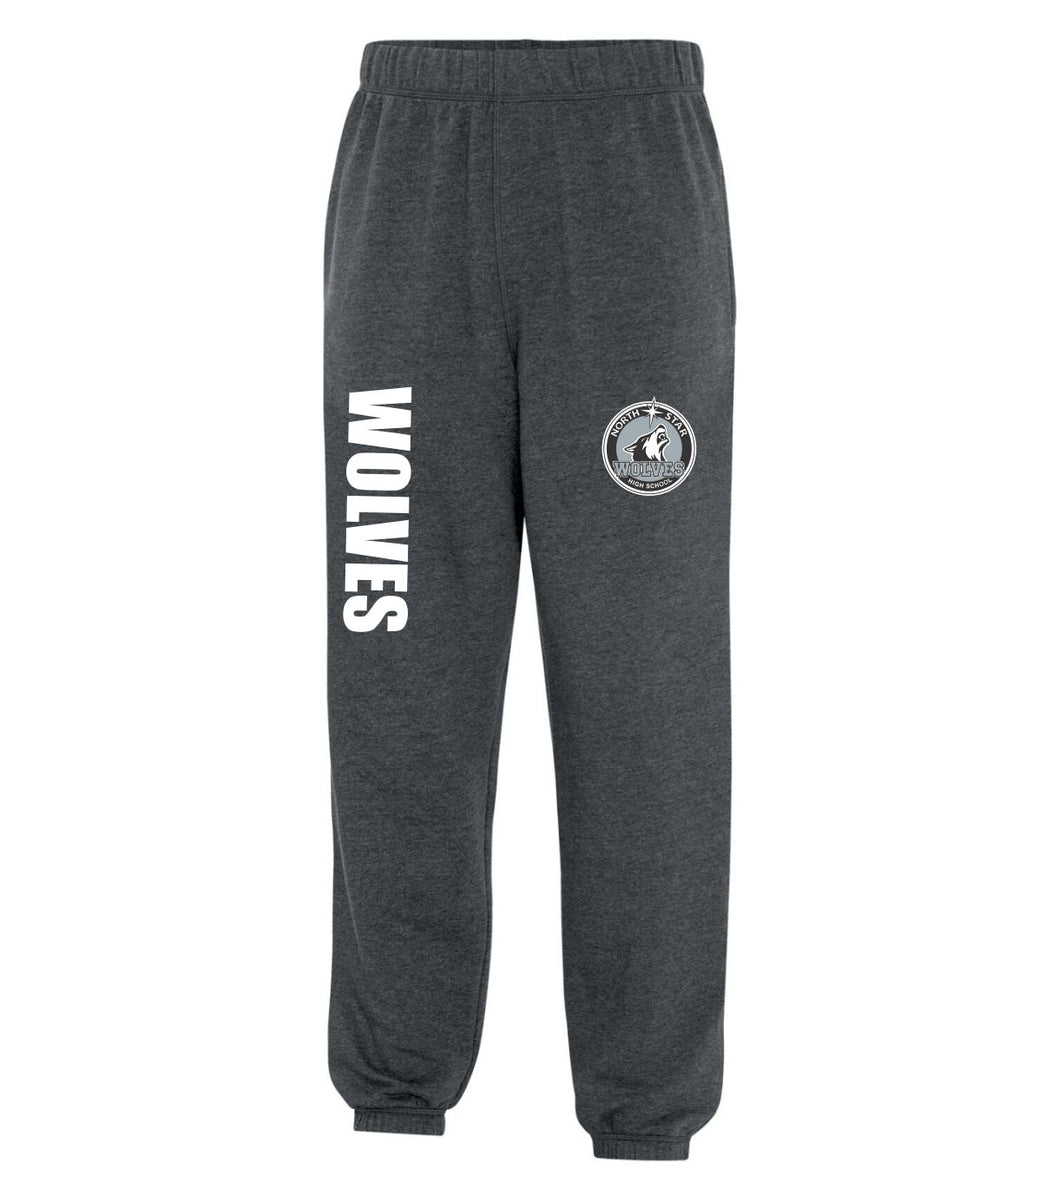 NORTH STAR WOLVES JOGGERS – Accurate Creations